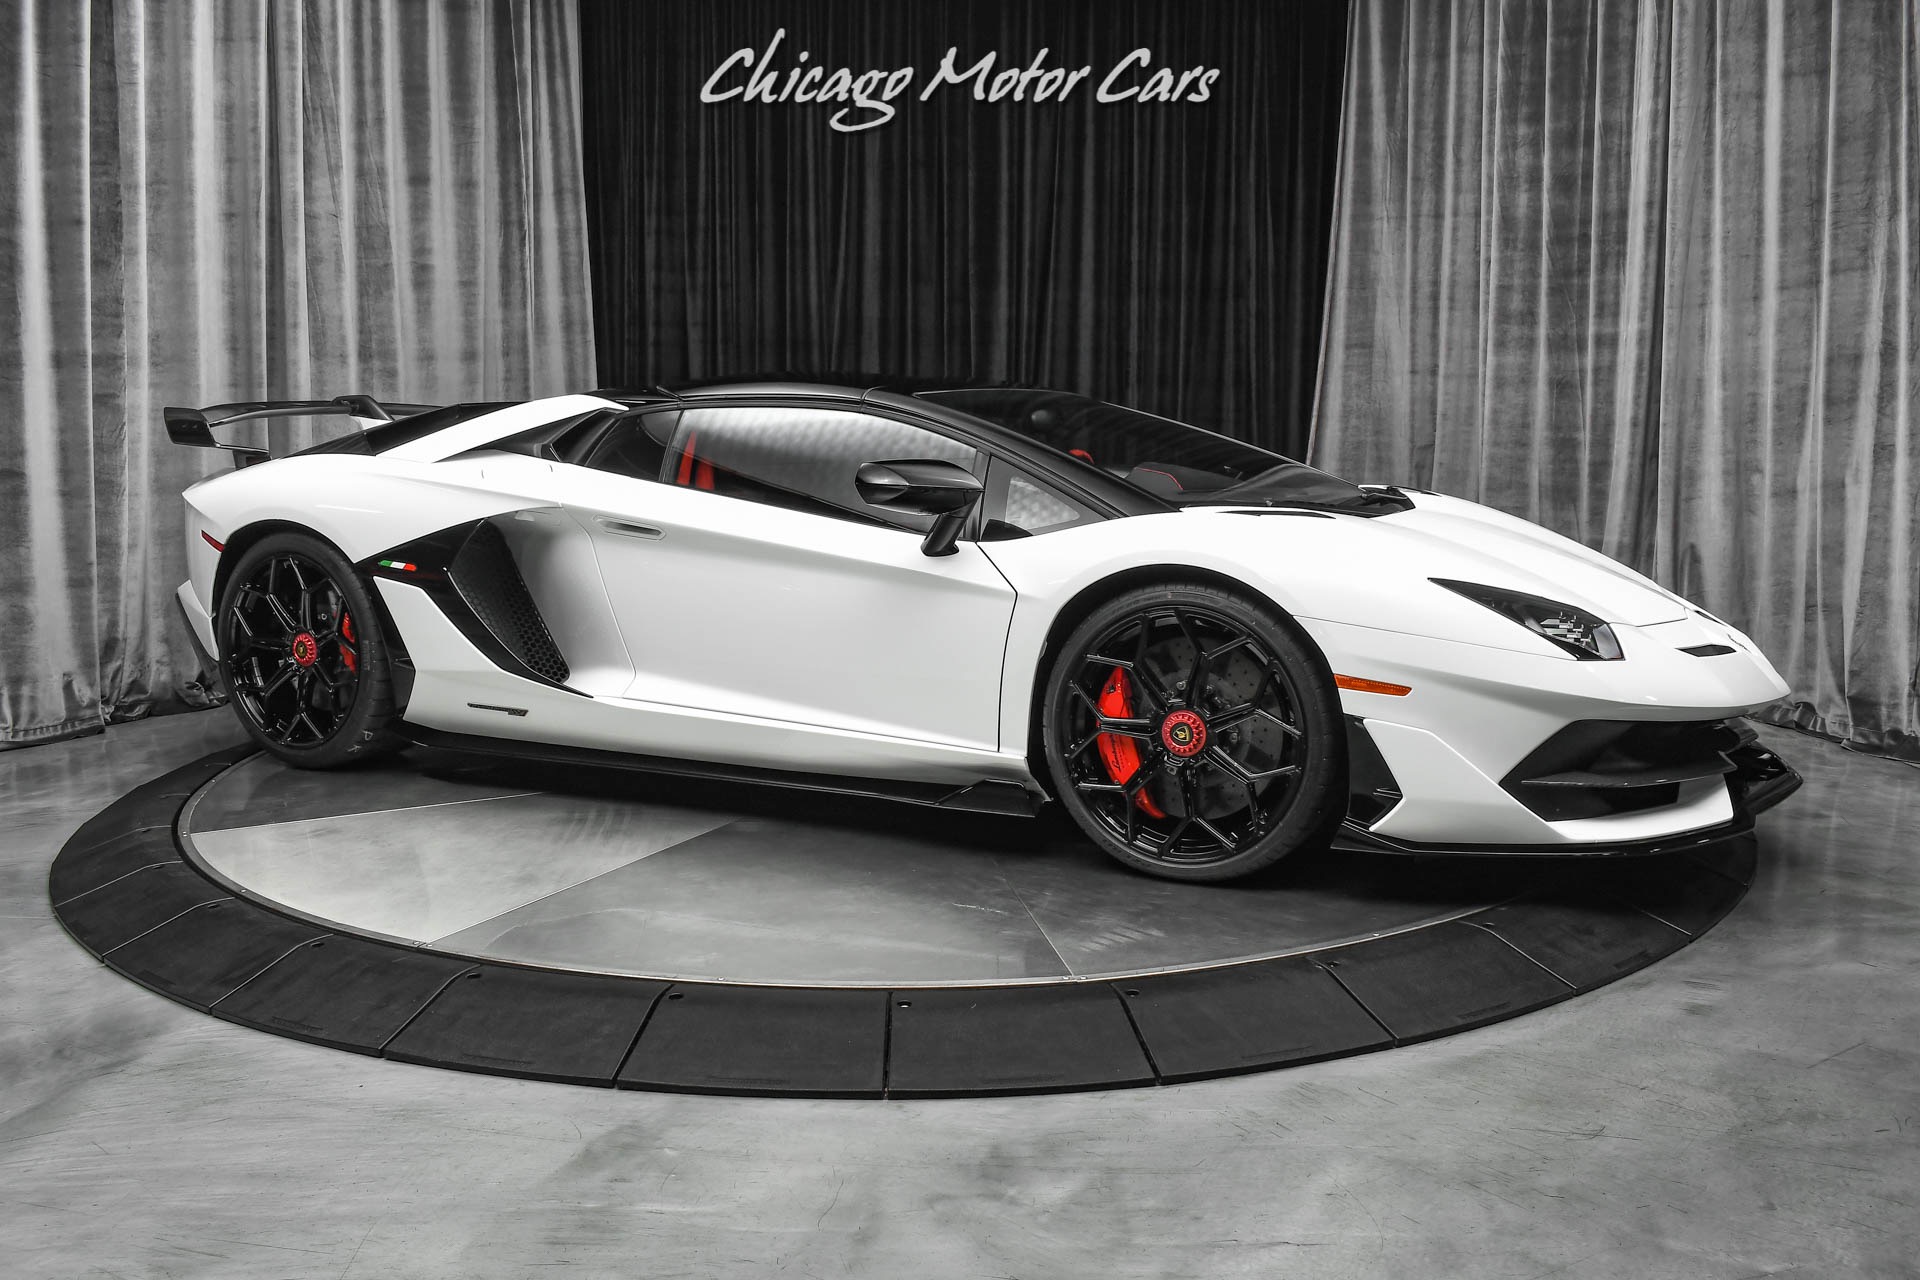 Used 2021 Lamborghini Aventador SVJ Roadster RARE! AD PERSONAM INTERIOR &  EXTERIOR! ONLY 300 MILES! LOADED! For Sale (Special Pricing) | Chicago Motor  Cars Stock #18459